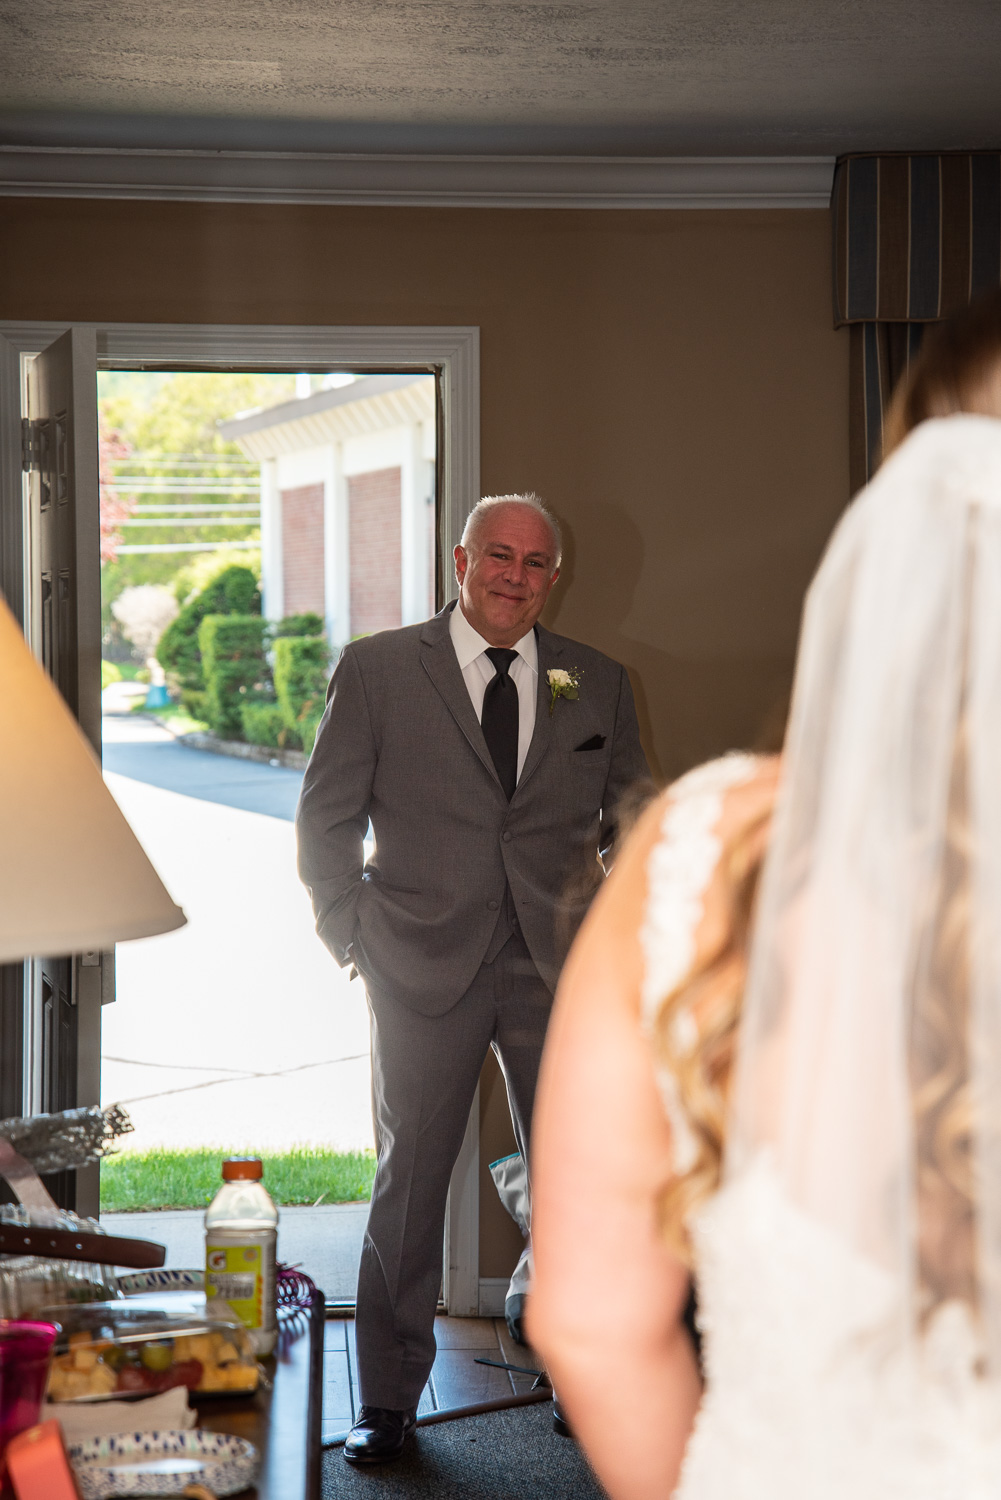 Brides' dad walking into the room to see the bride for the first time before the lakeside wedding